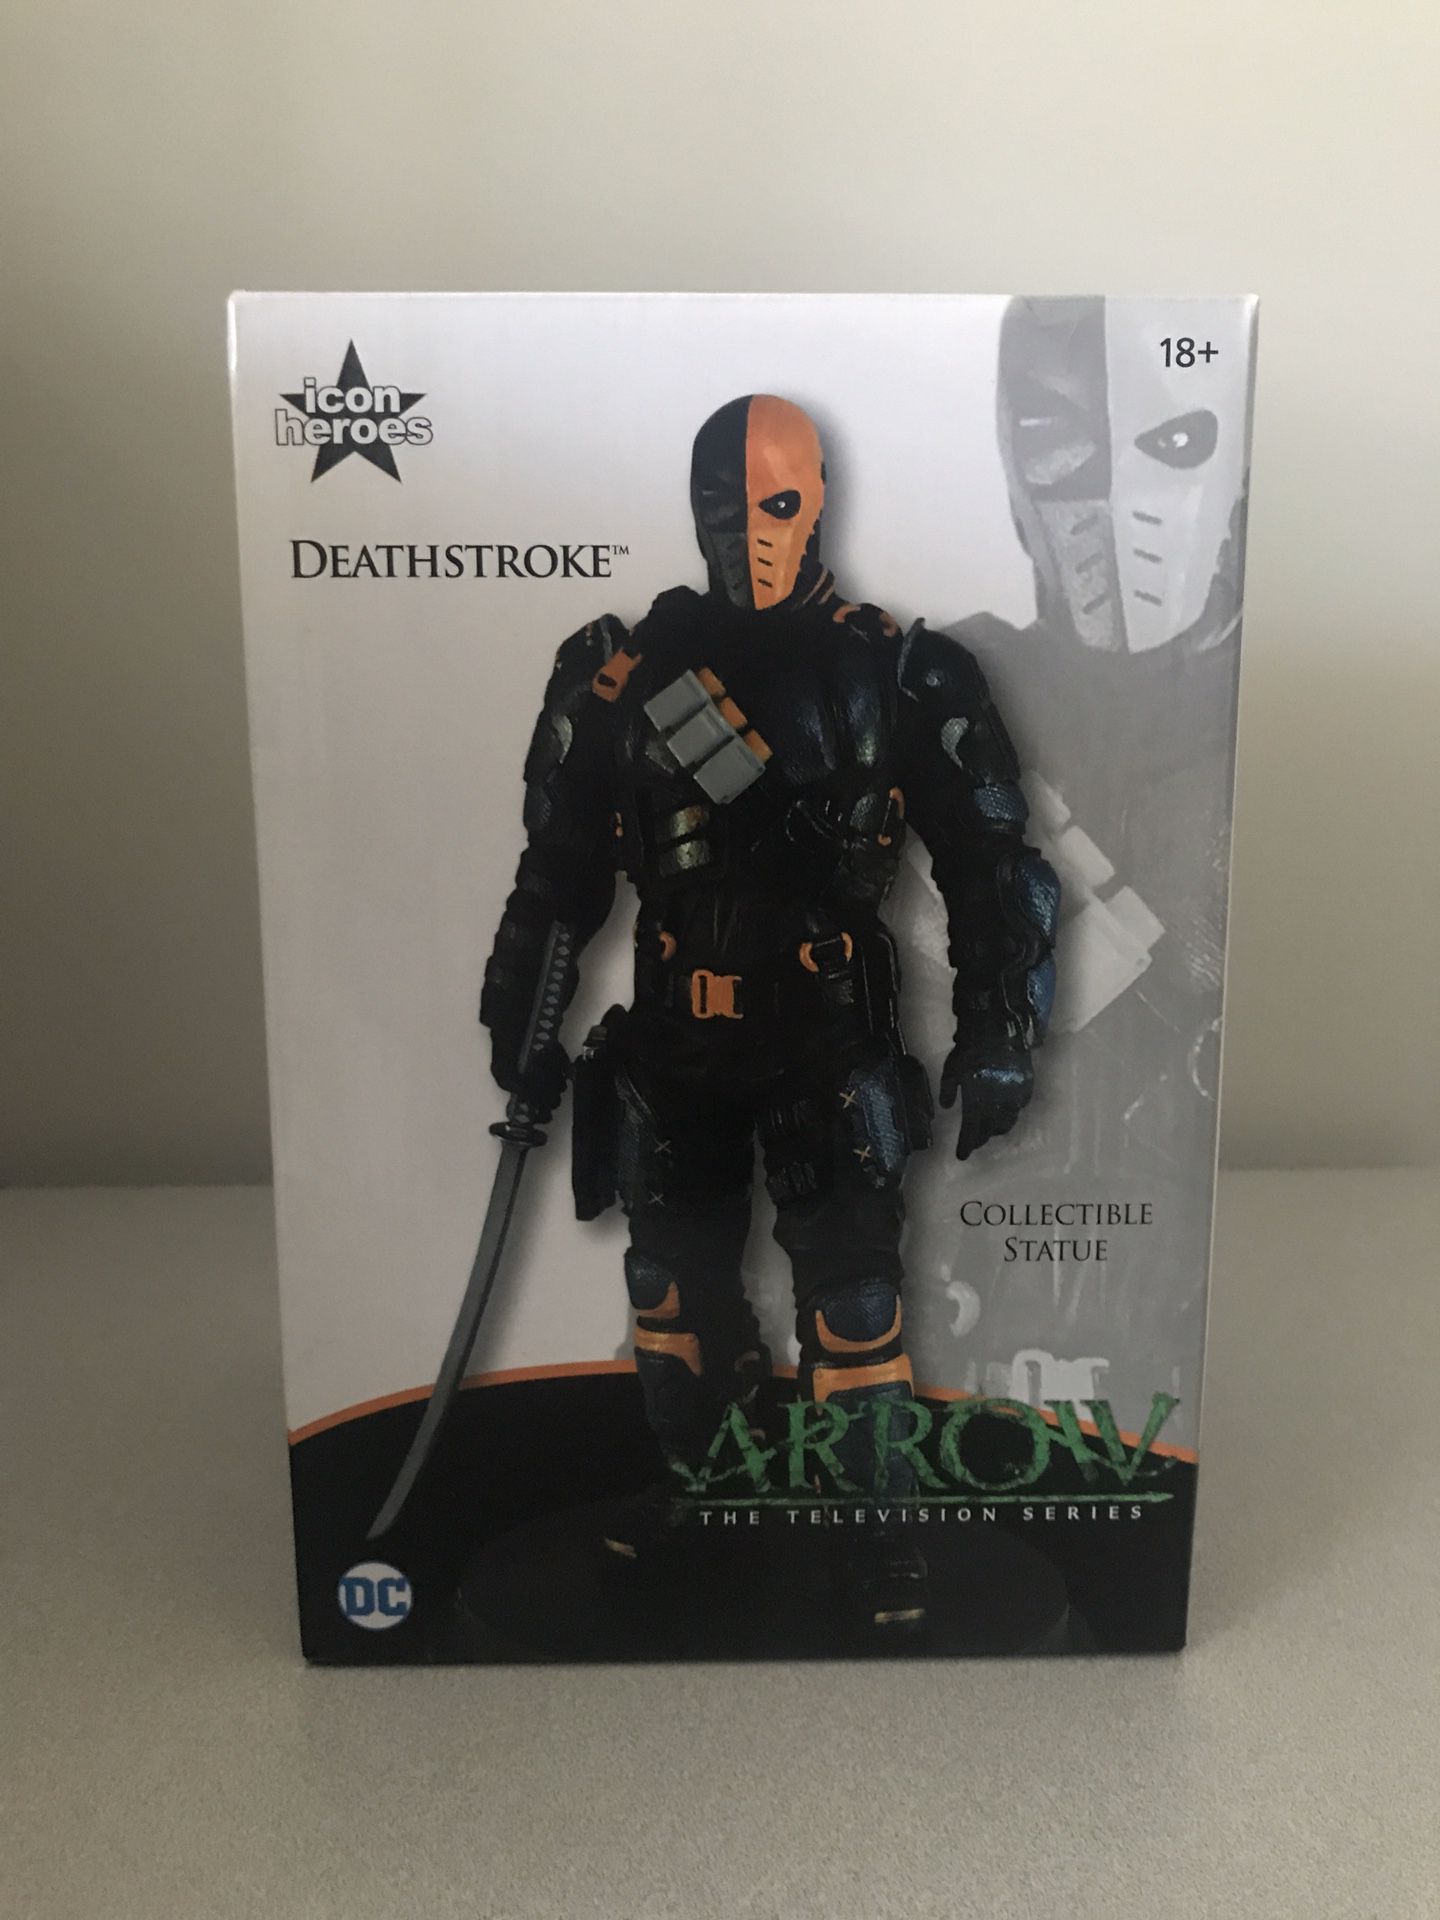 Deathstroke collectible statue